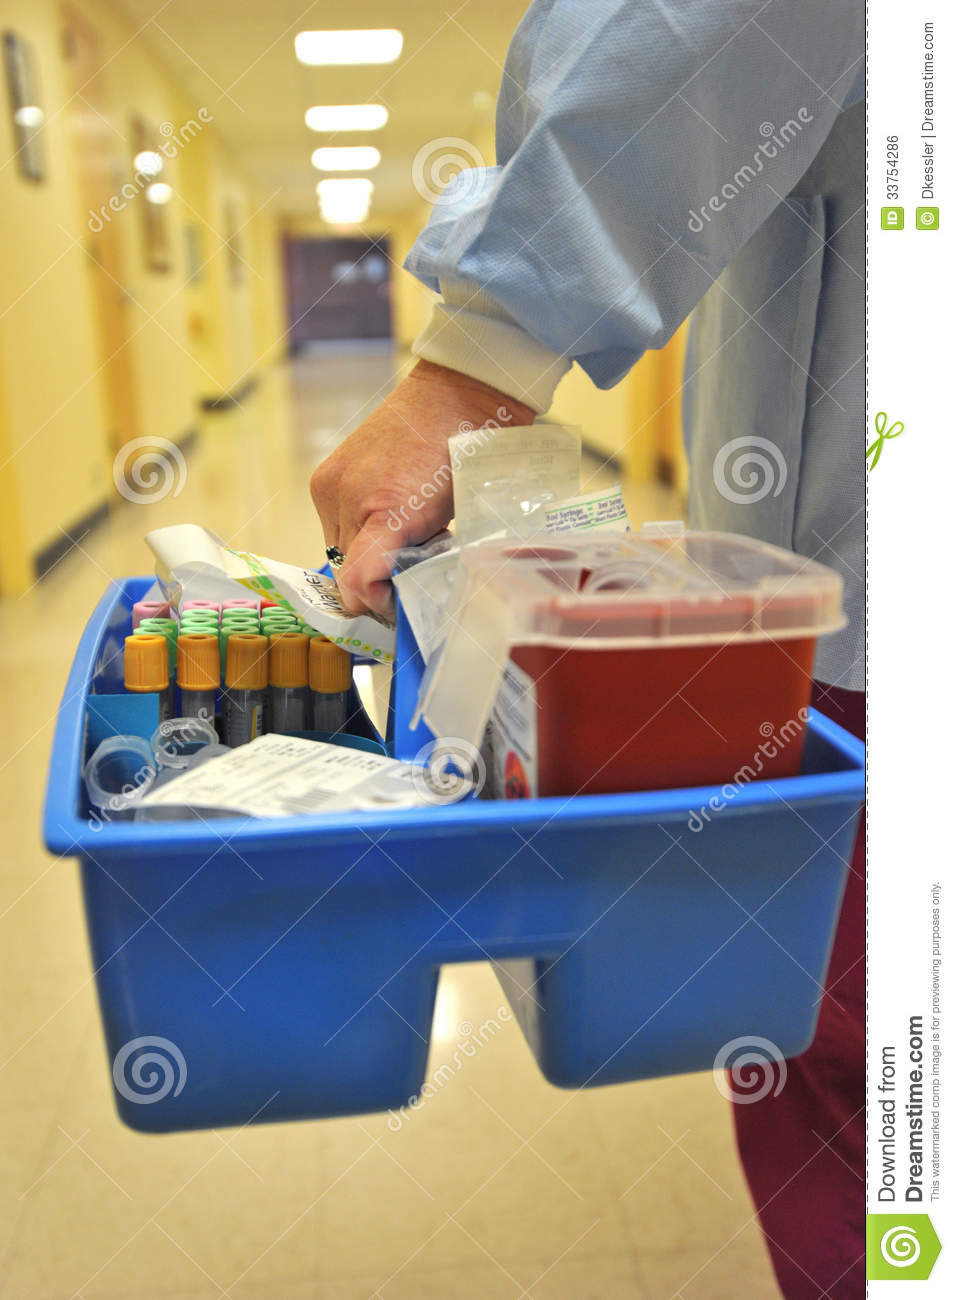 Lab Technician Carrying Tray To Patients Room To Take A Blood Sample    